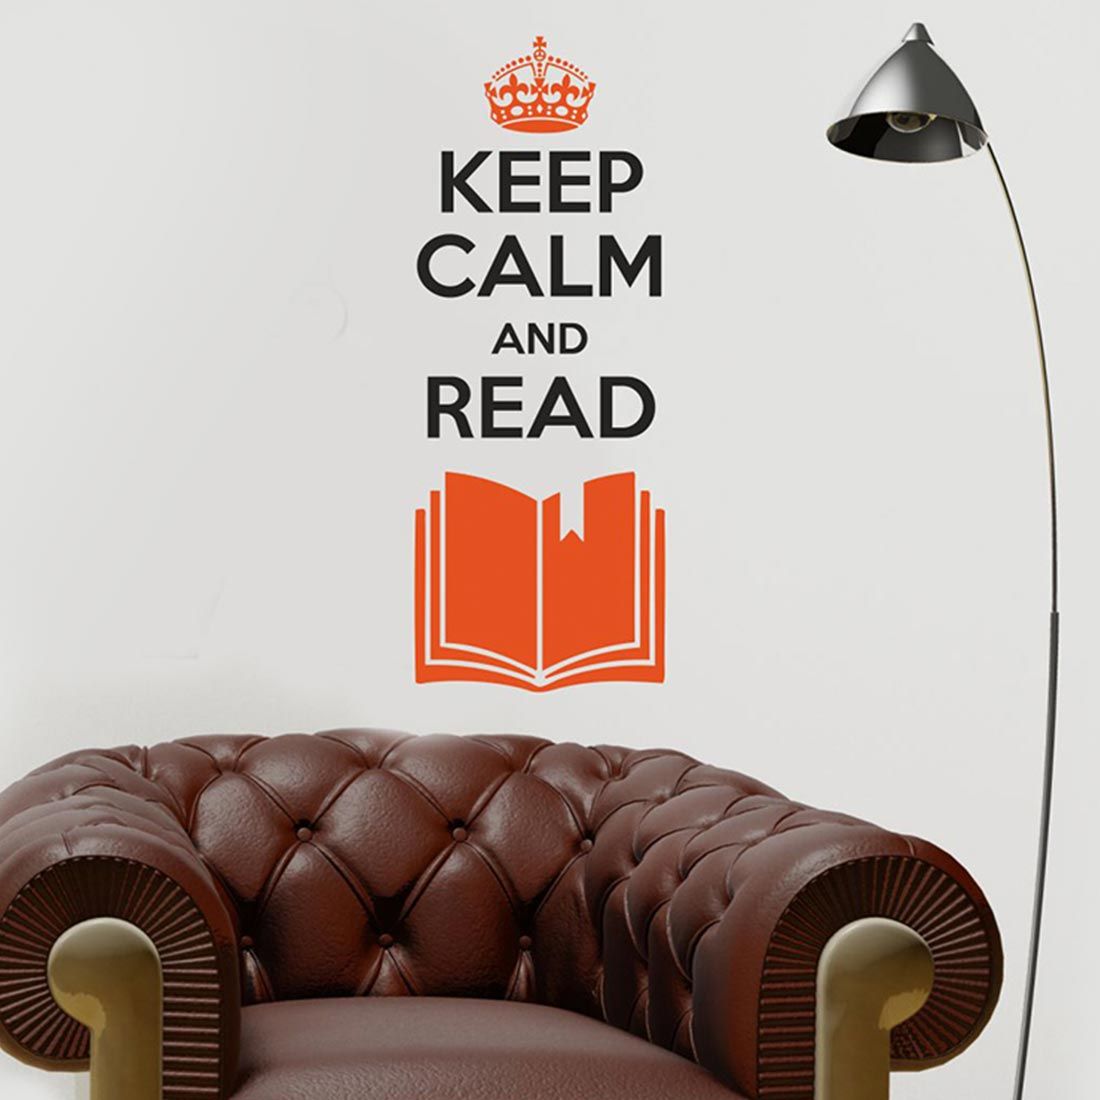 Keep Calm Read - Wall Stickers & Decals by Asian Paints